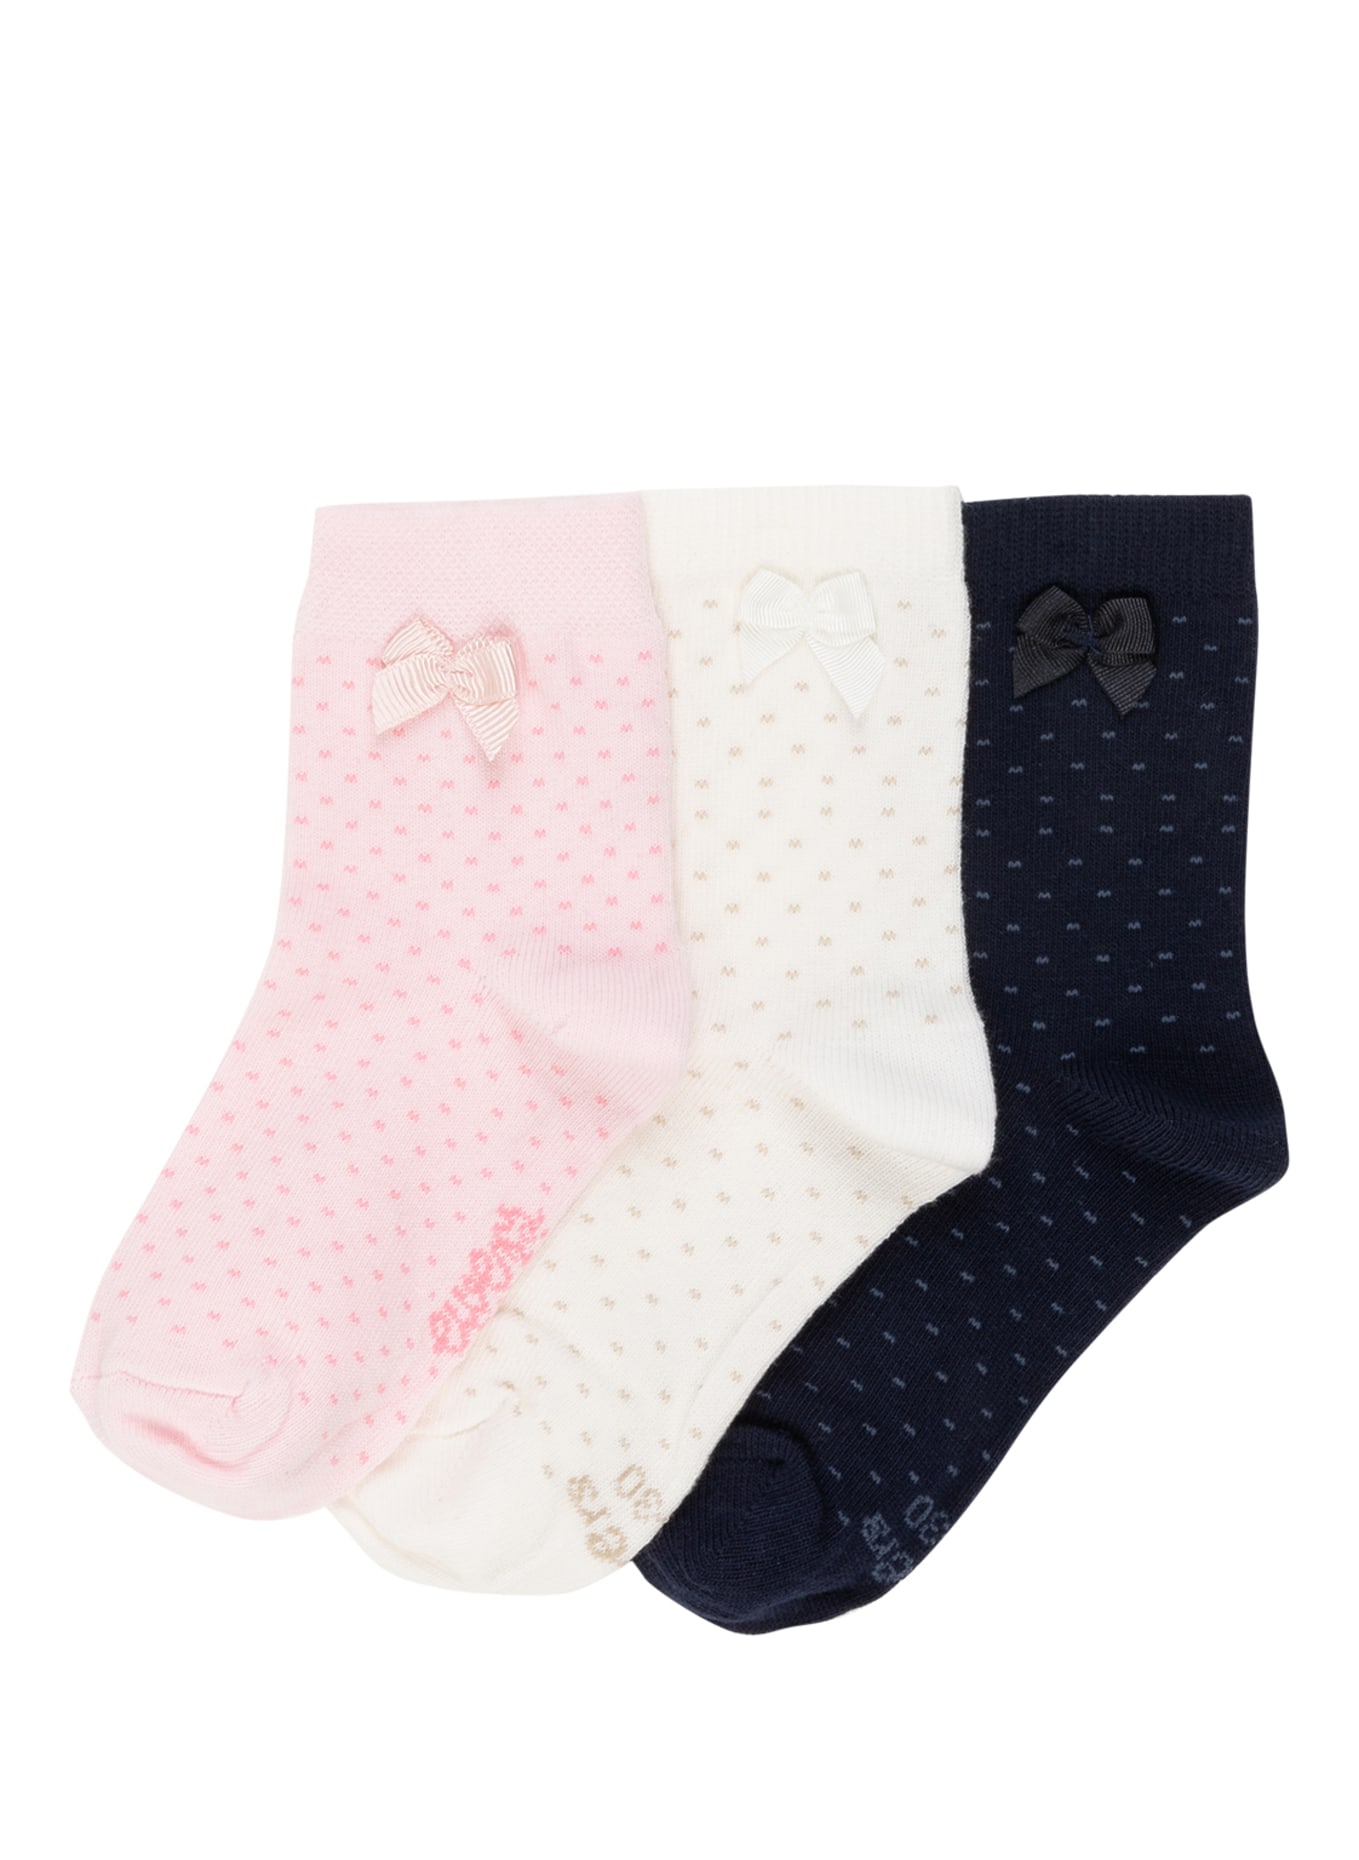 ewers COLLECTION 3-pack socks, Color: 8010 8010 latte, baby-rose, navy (Image 1)